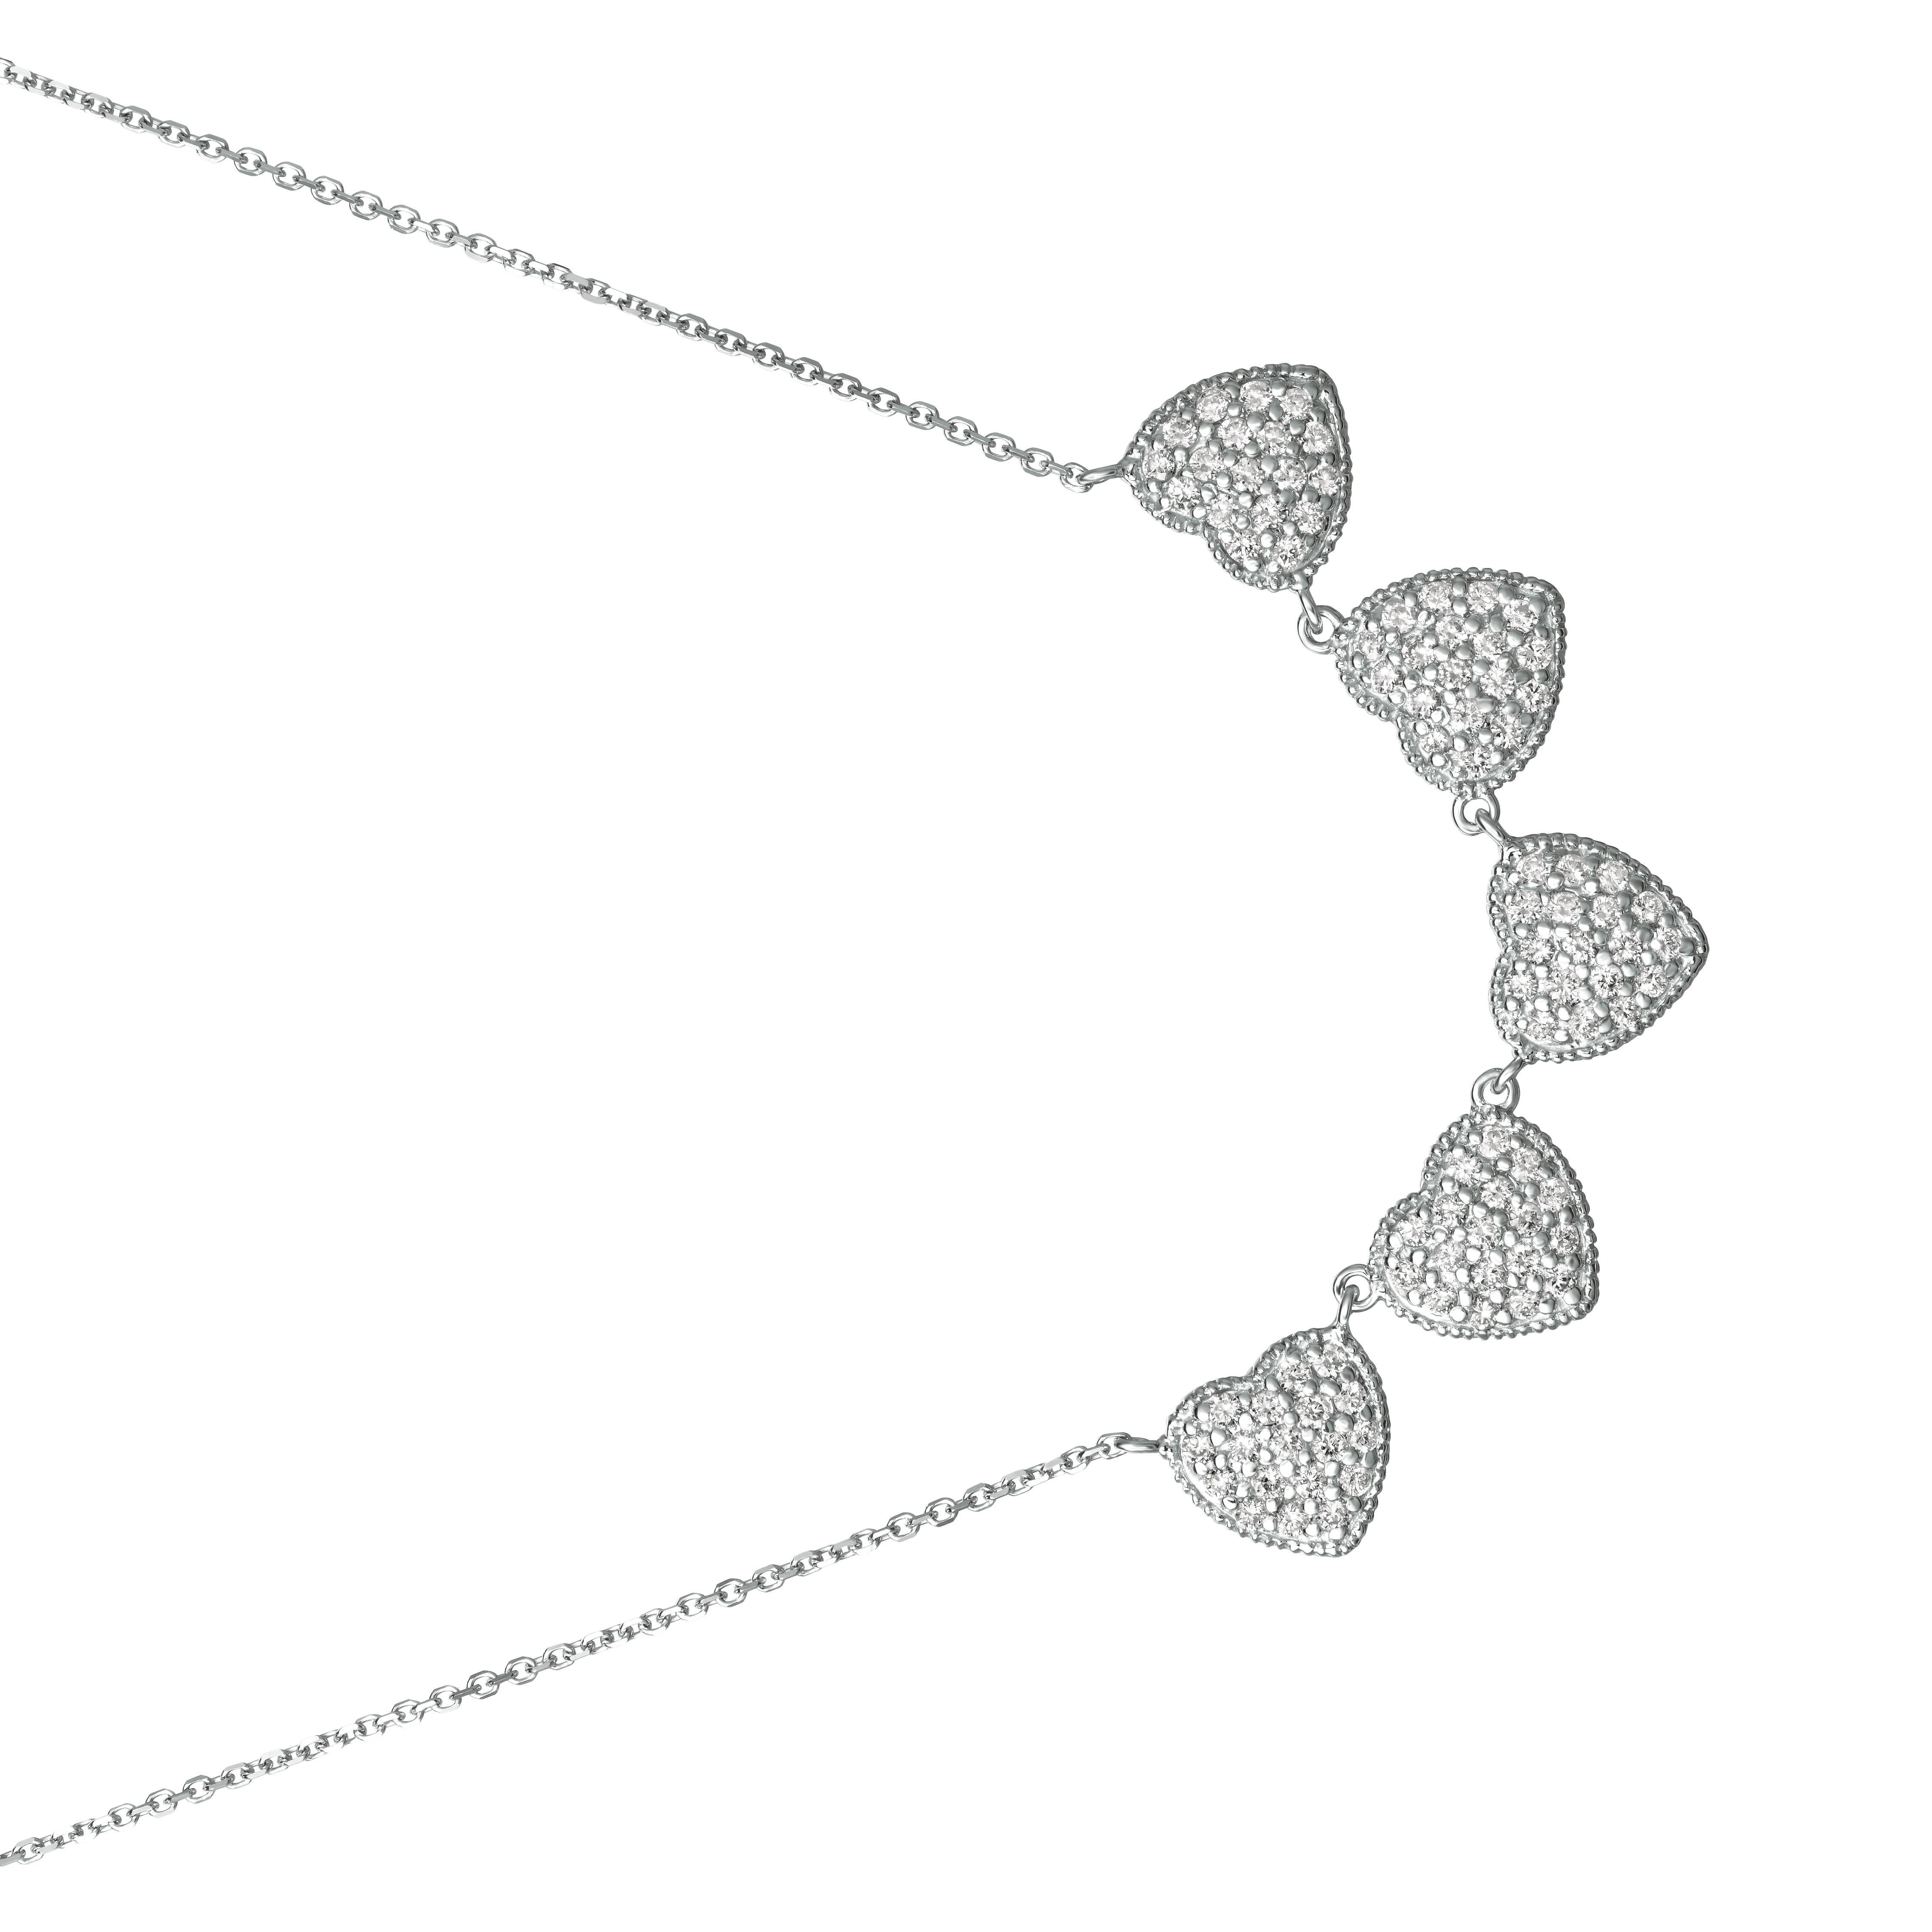 1.00 Carat Natural Diamond Heart Necklace 14K White Gold G SI 18 inches

100% Natural Diamonds, Not Enhanced in any way Round Cut Diamond Necklace
1.00CT
G-H
SI
14K White Gold, Pave style, 4.4 gram
3/8 inch in height, 2 inches in width
18 inches in